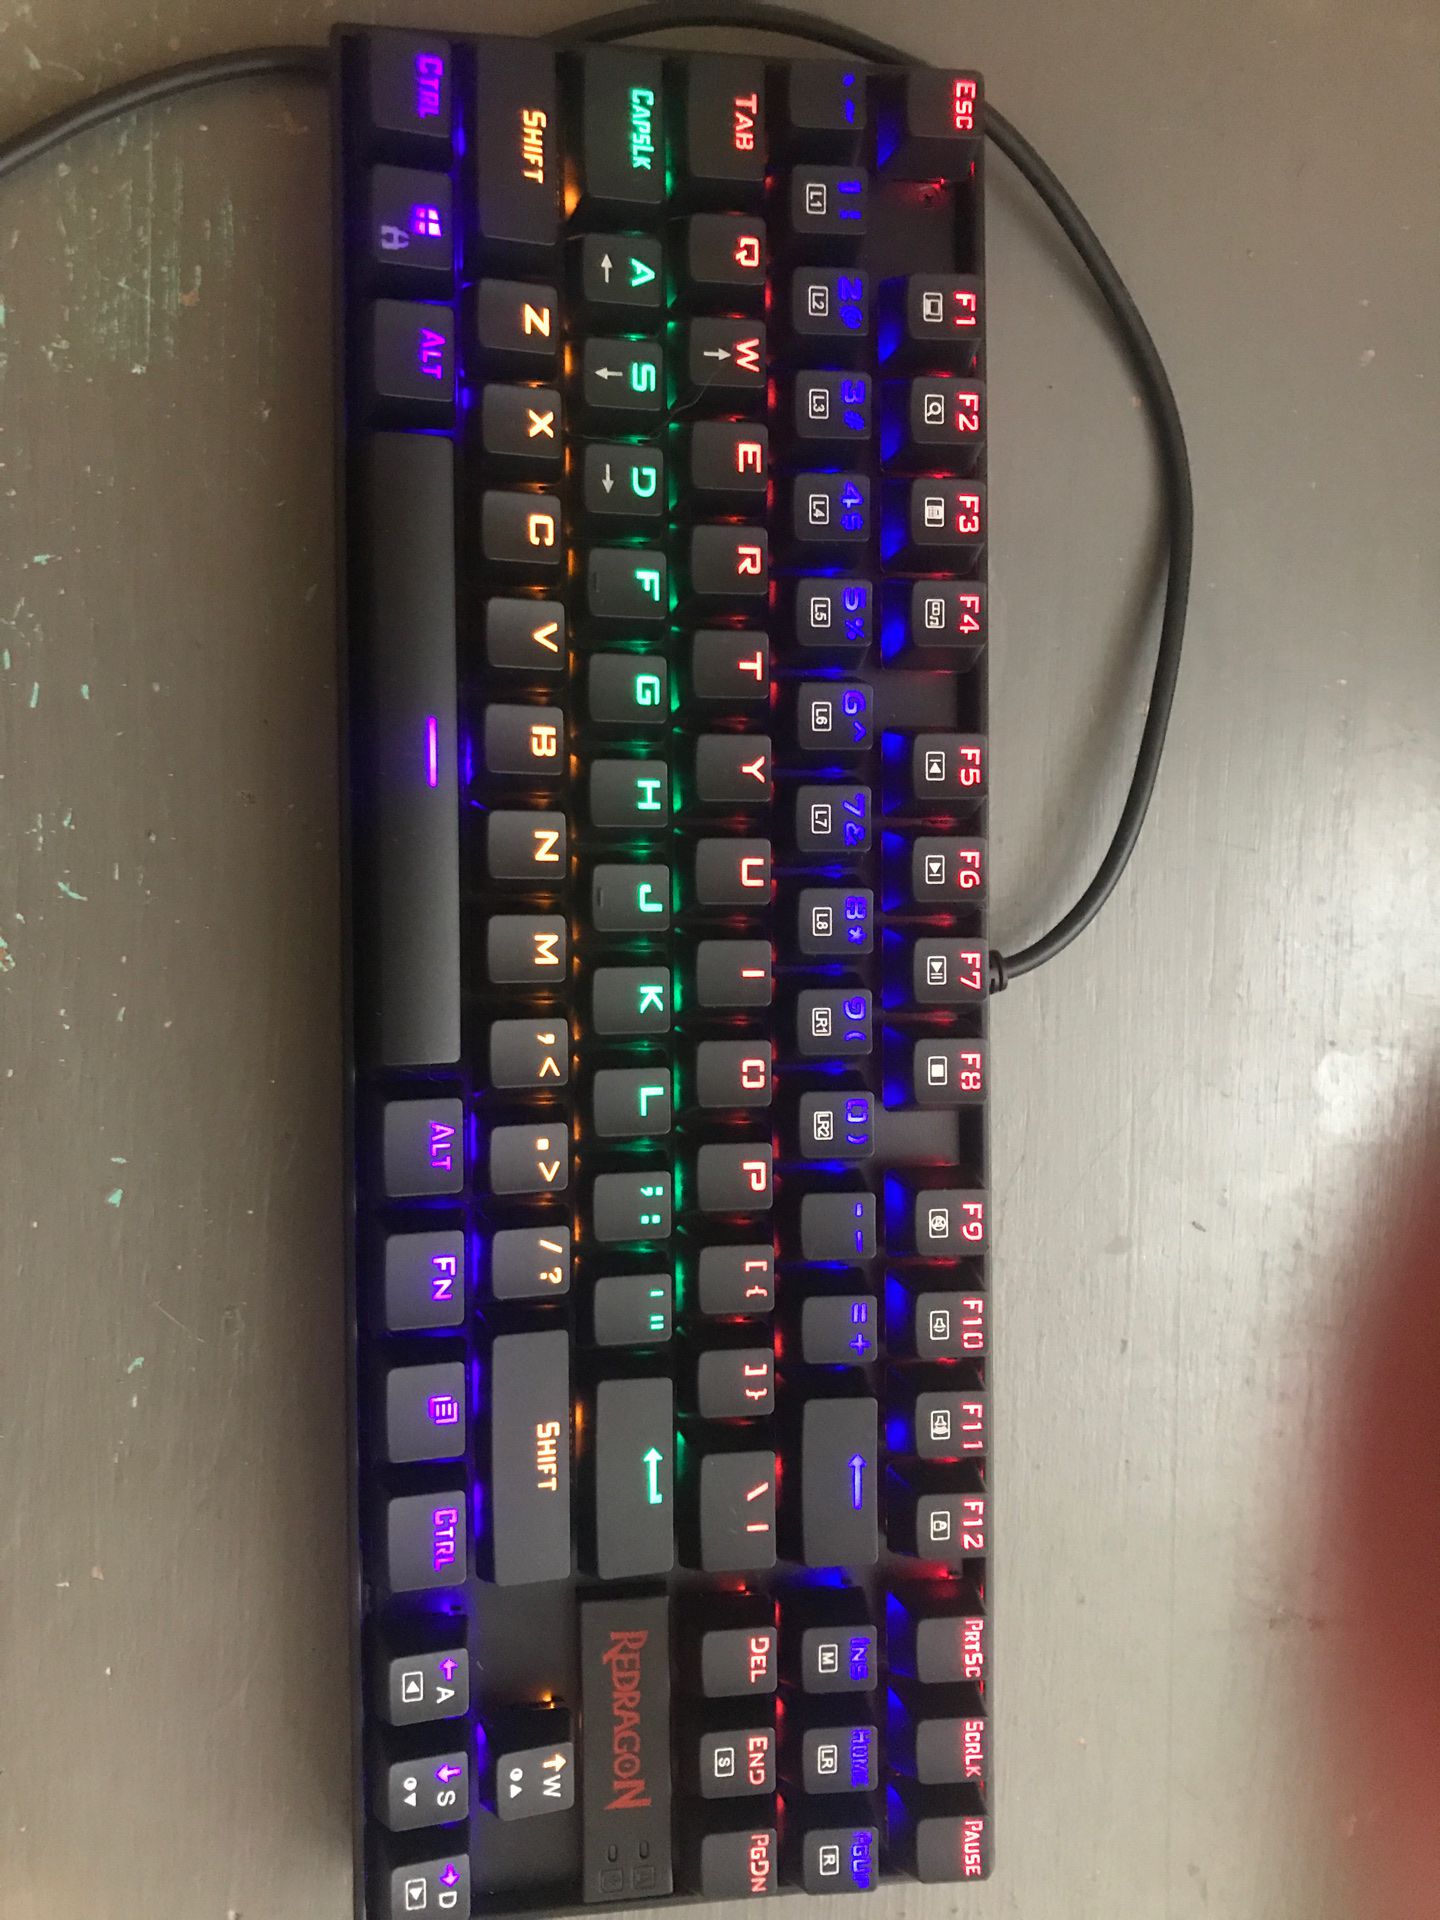 Redragon K533 Rainbow Keyboard— Chonchow Keyboard Rainbow backlit— Chonchow Mouse and Mouse pad